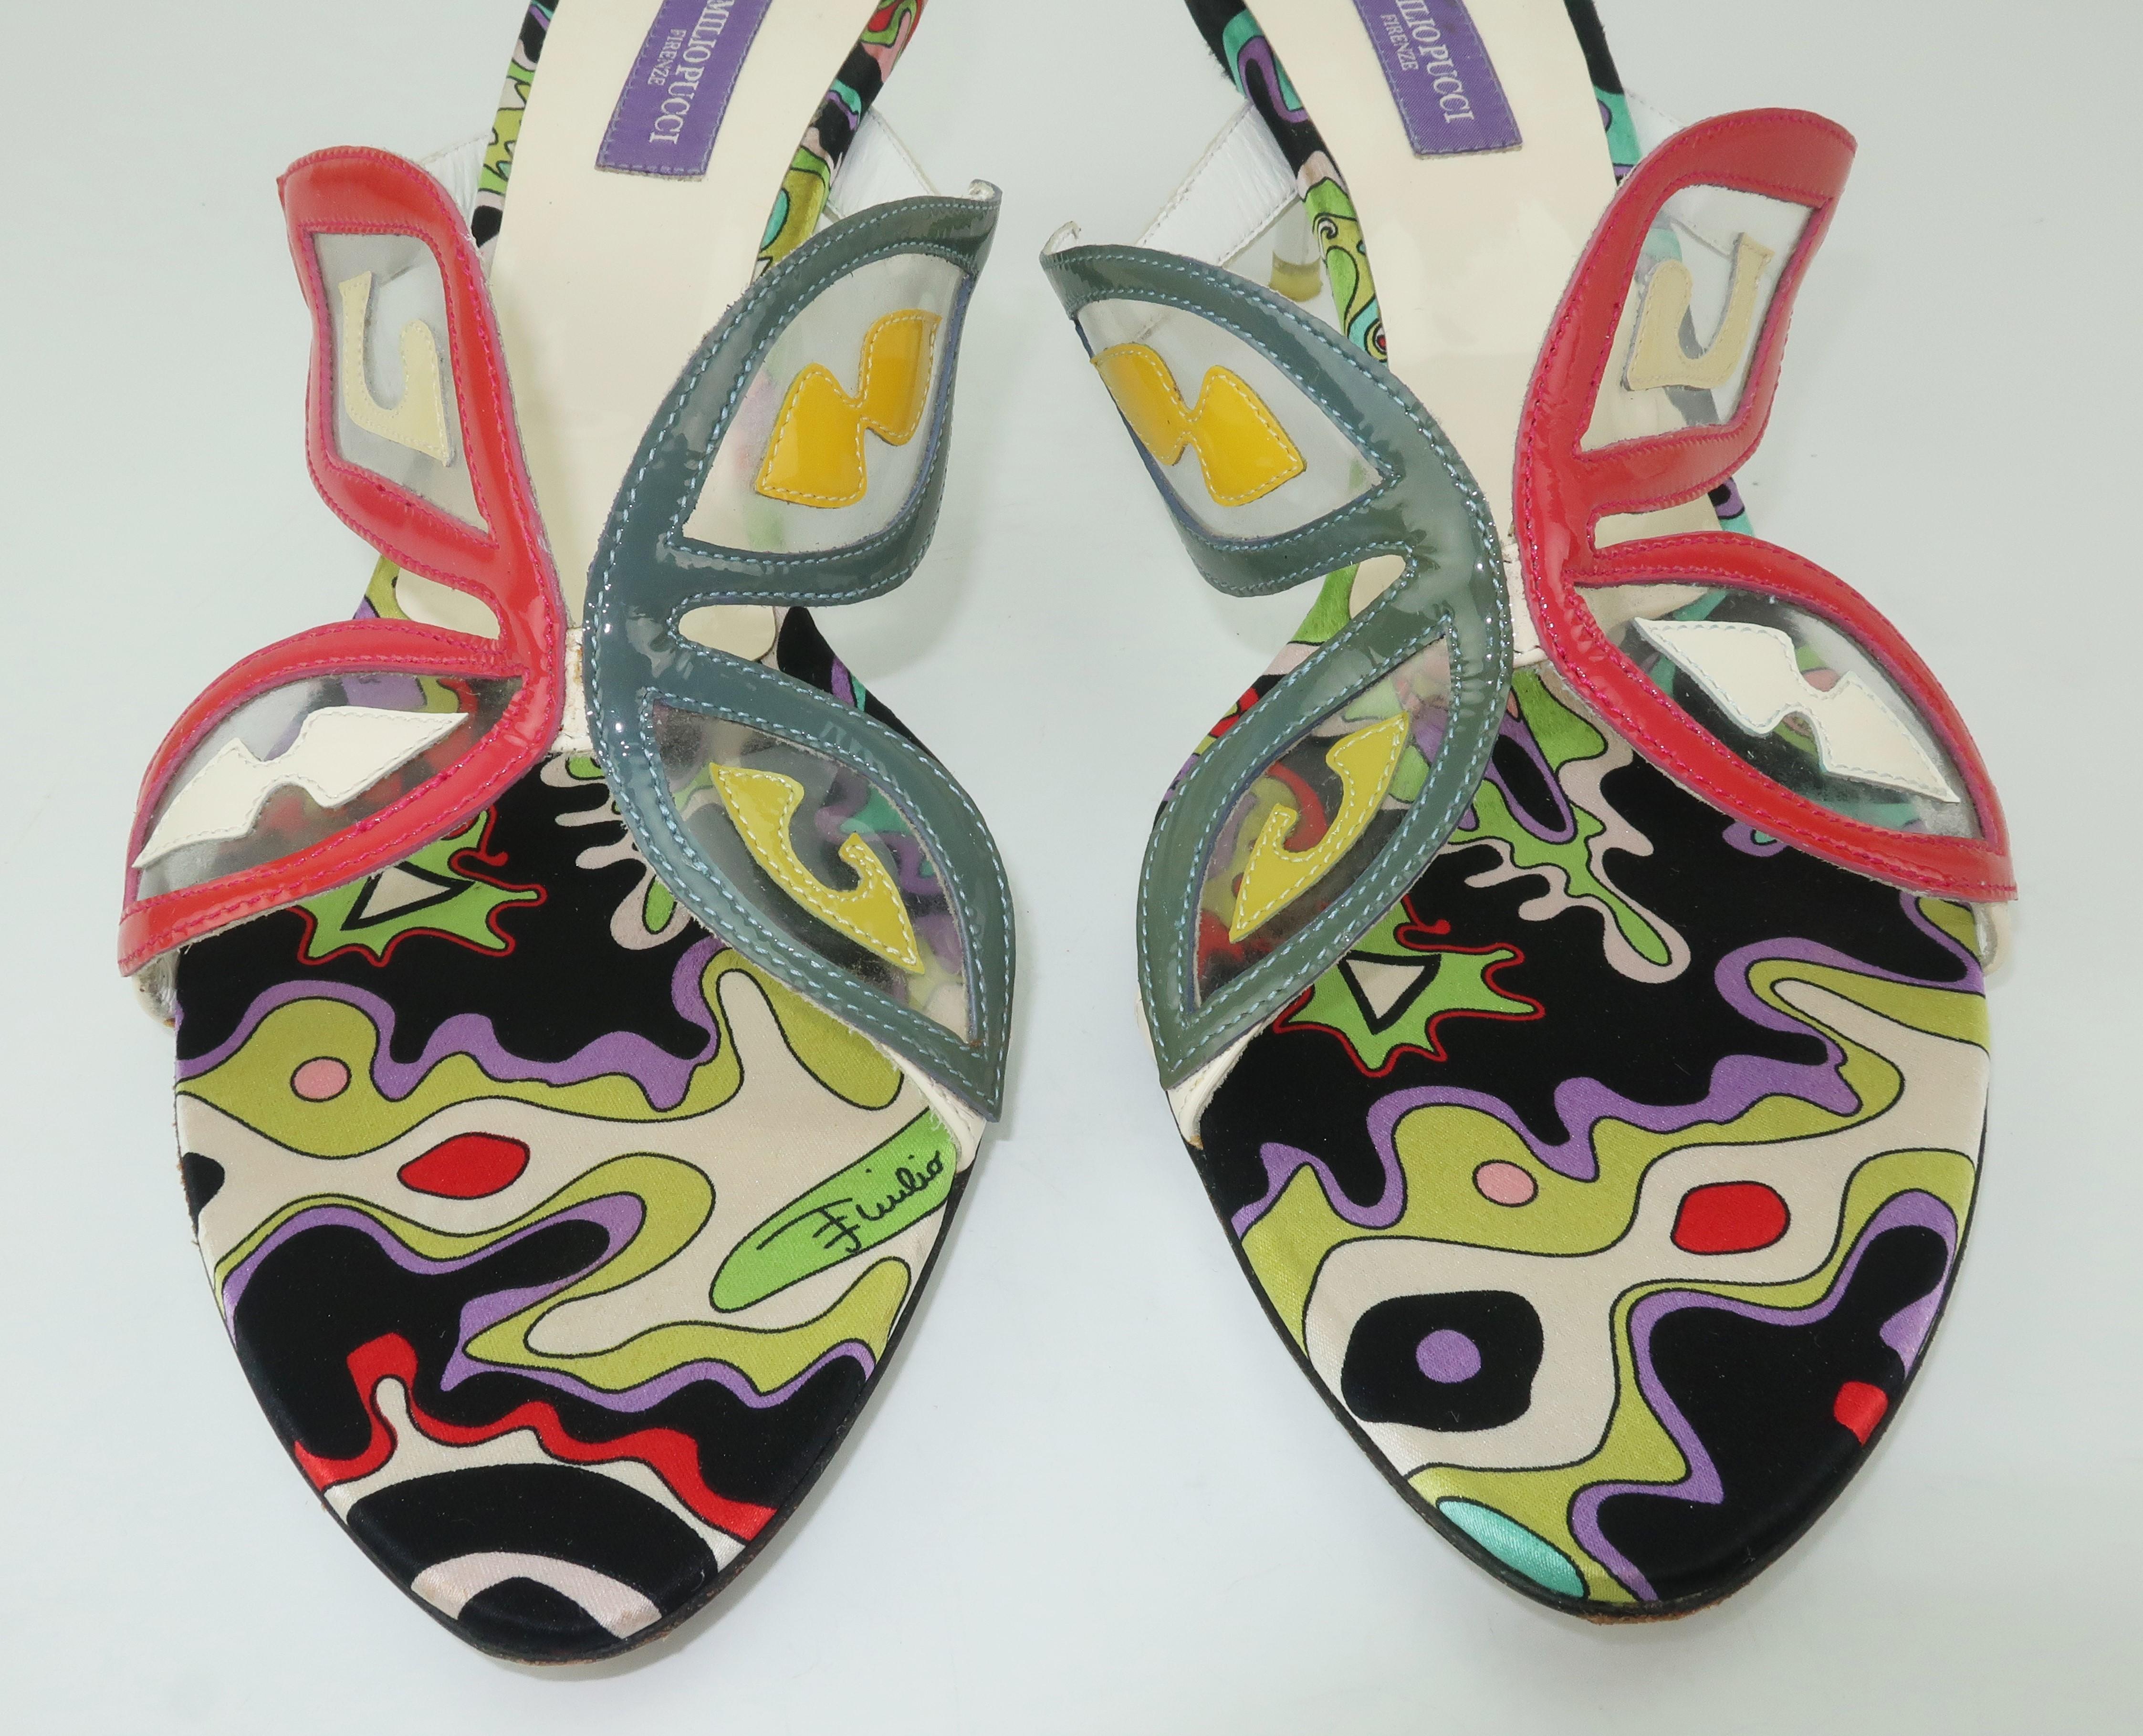 Emilio Pucci Patent Leather Butterfly Mules Shoes Sz 39 1/2 2